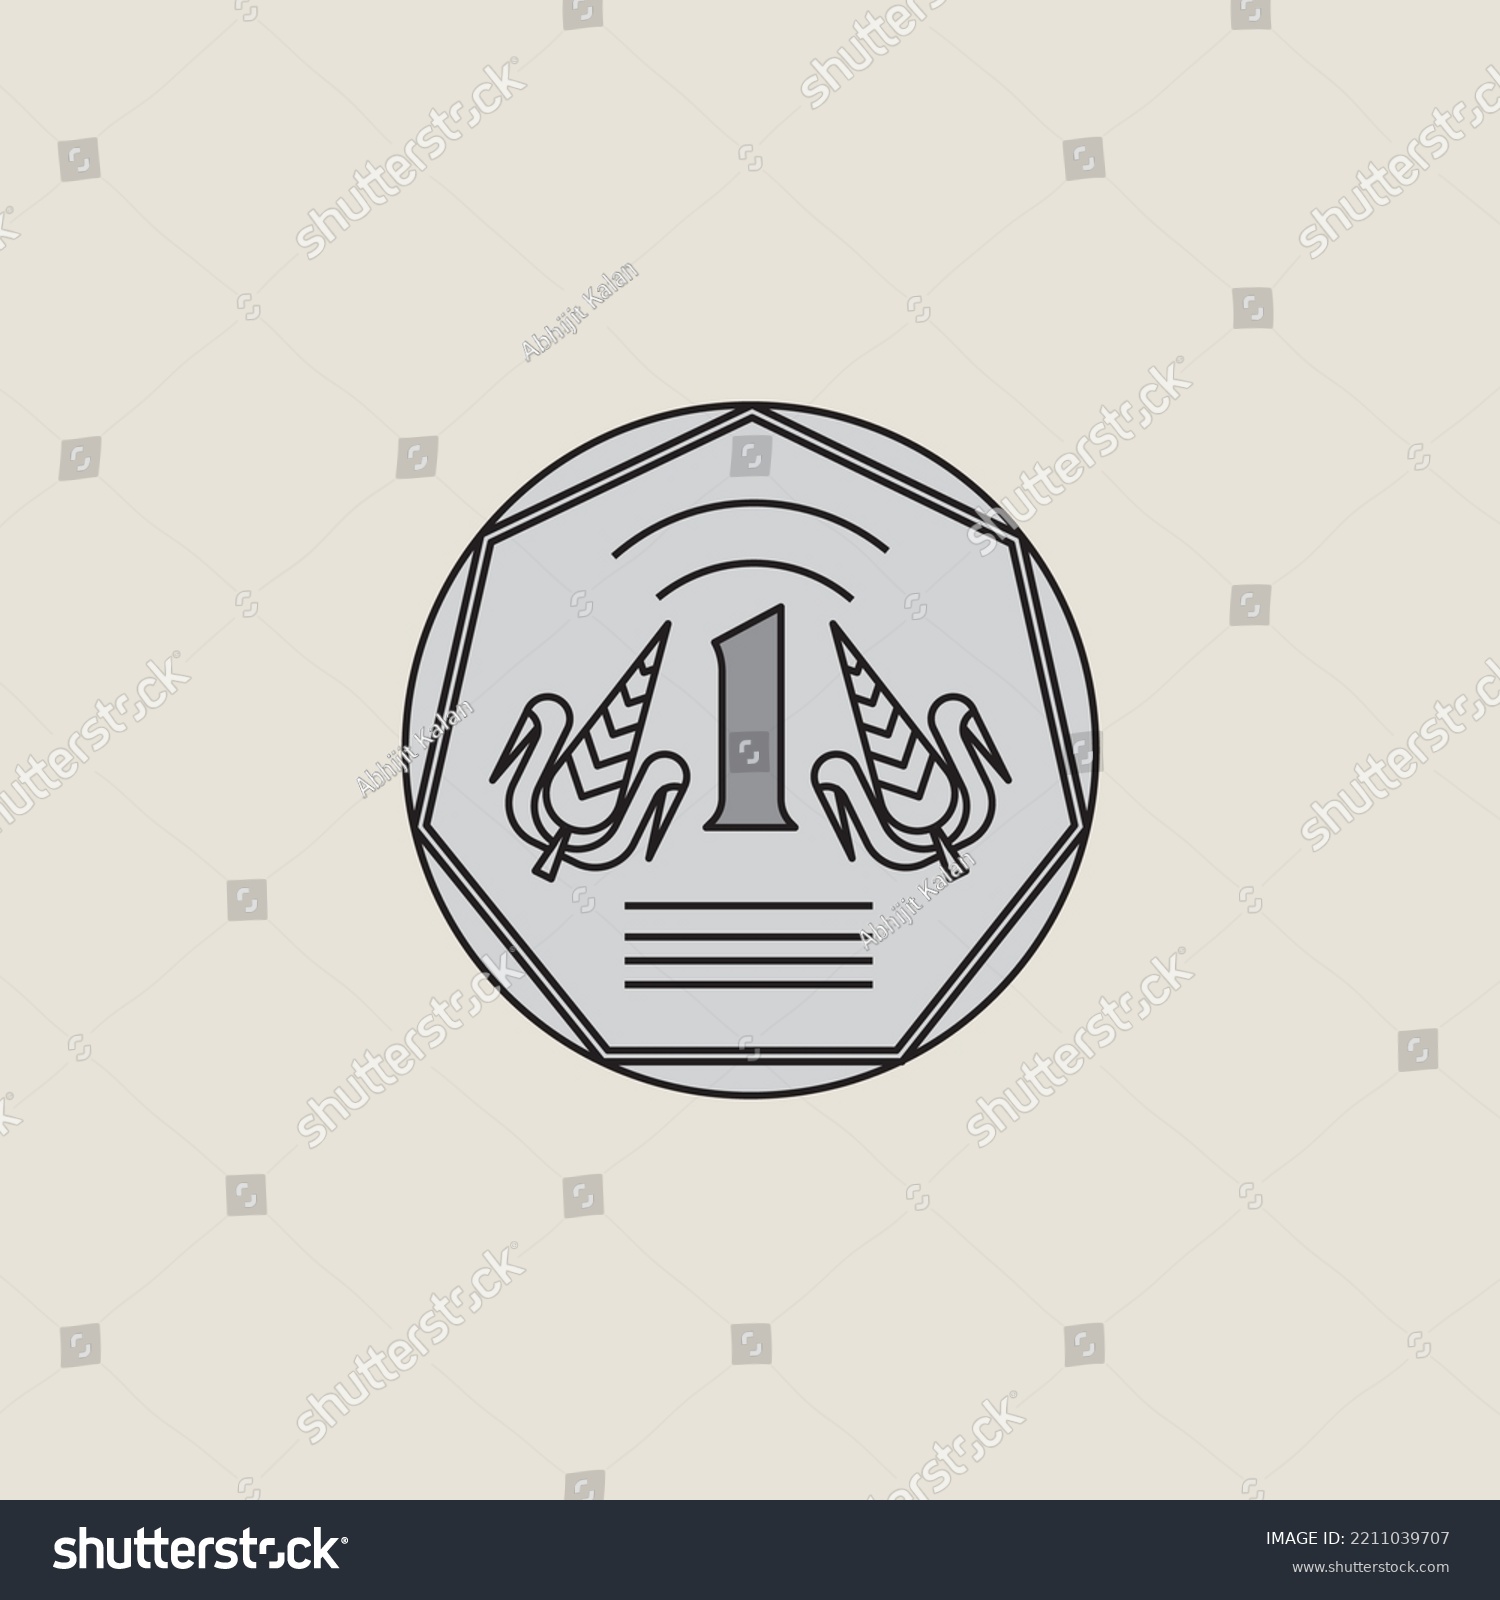 SVG of geometric minimal representation on Indian one rupee coin svg